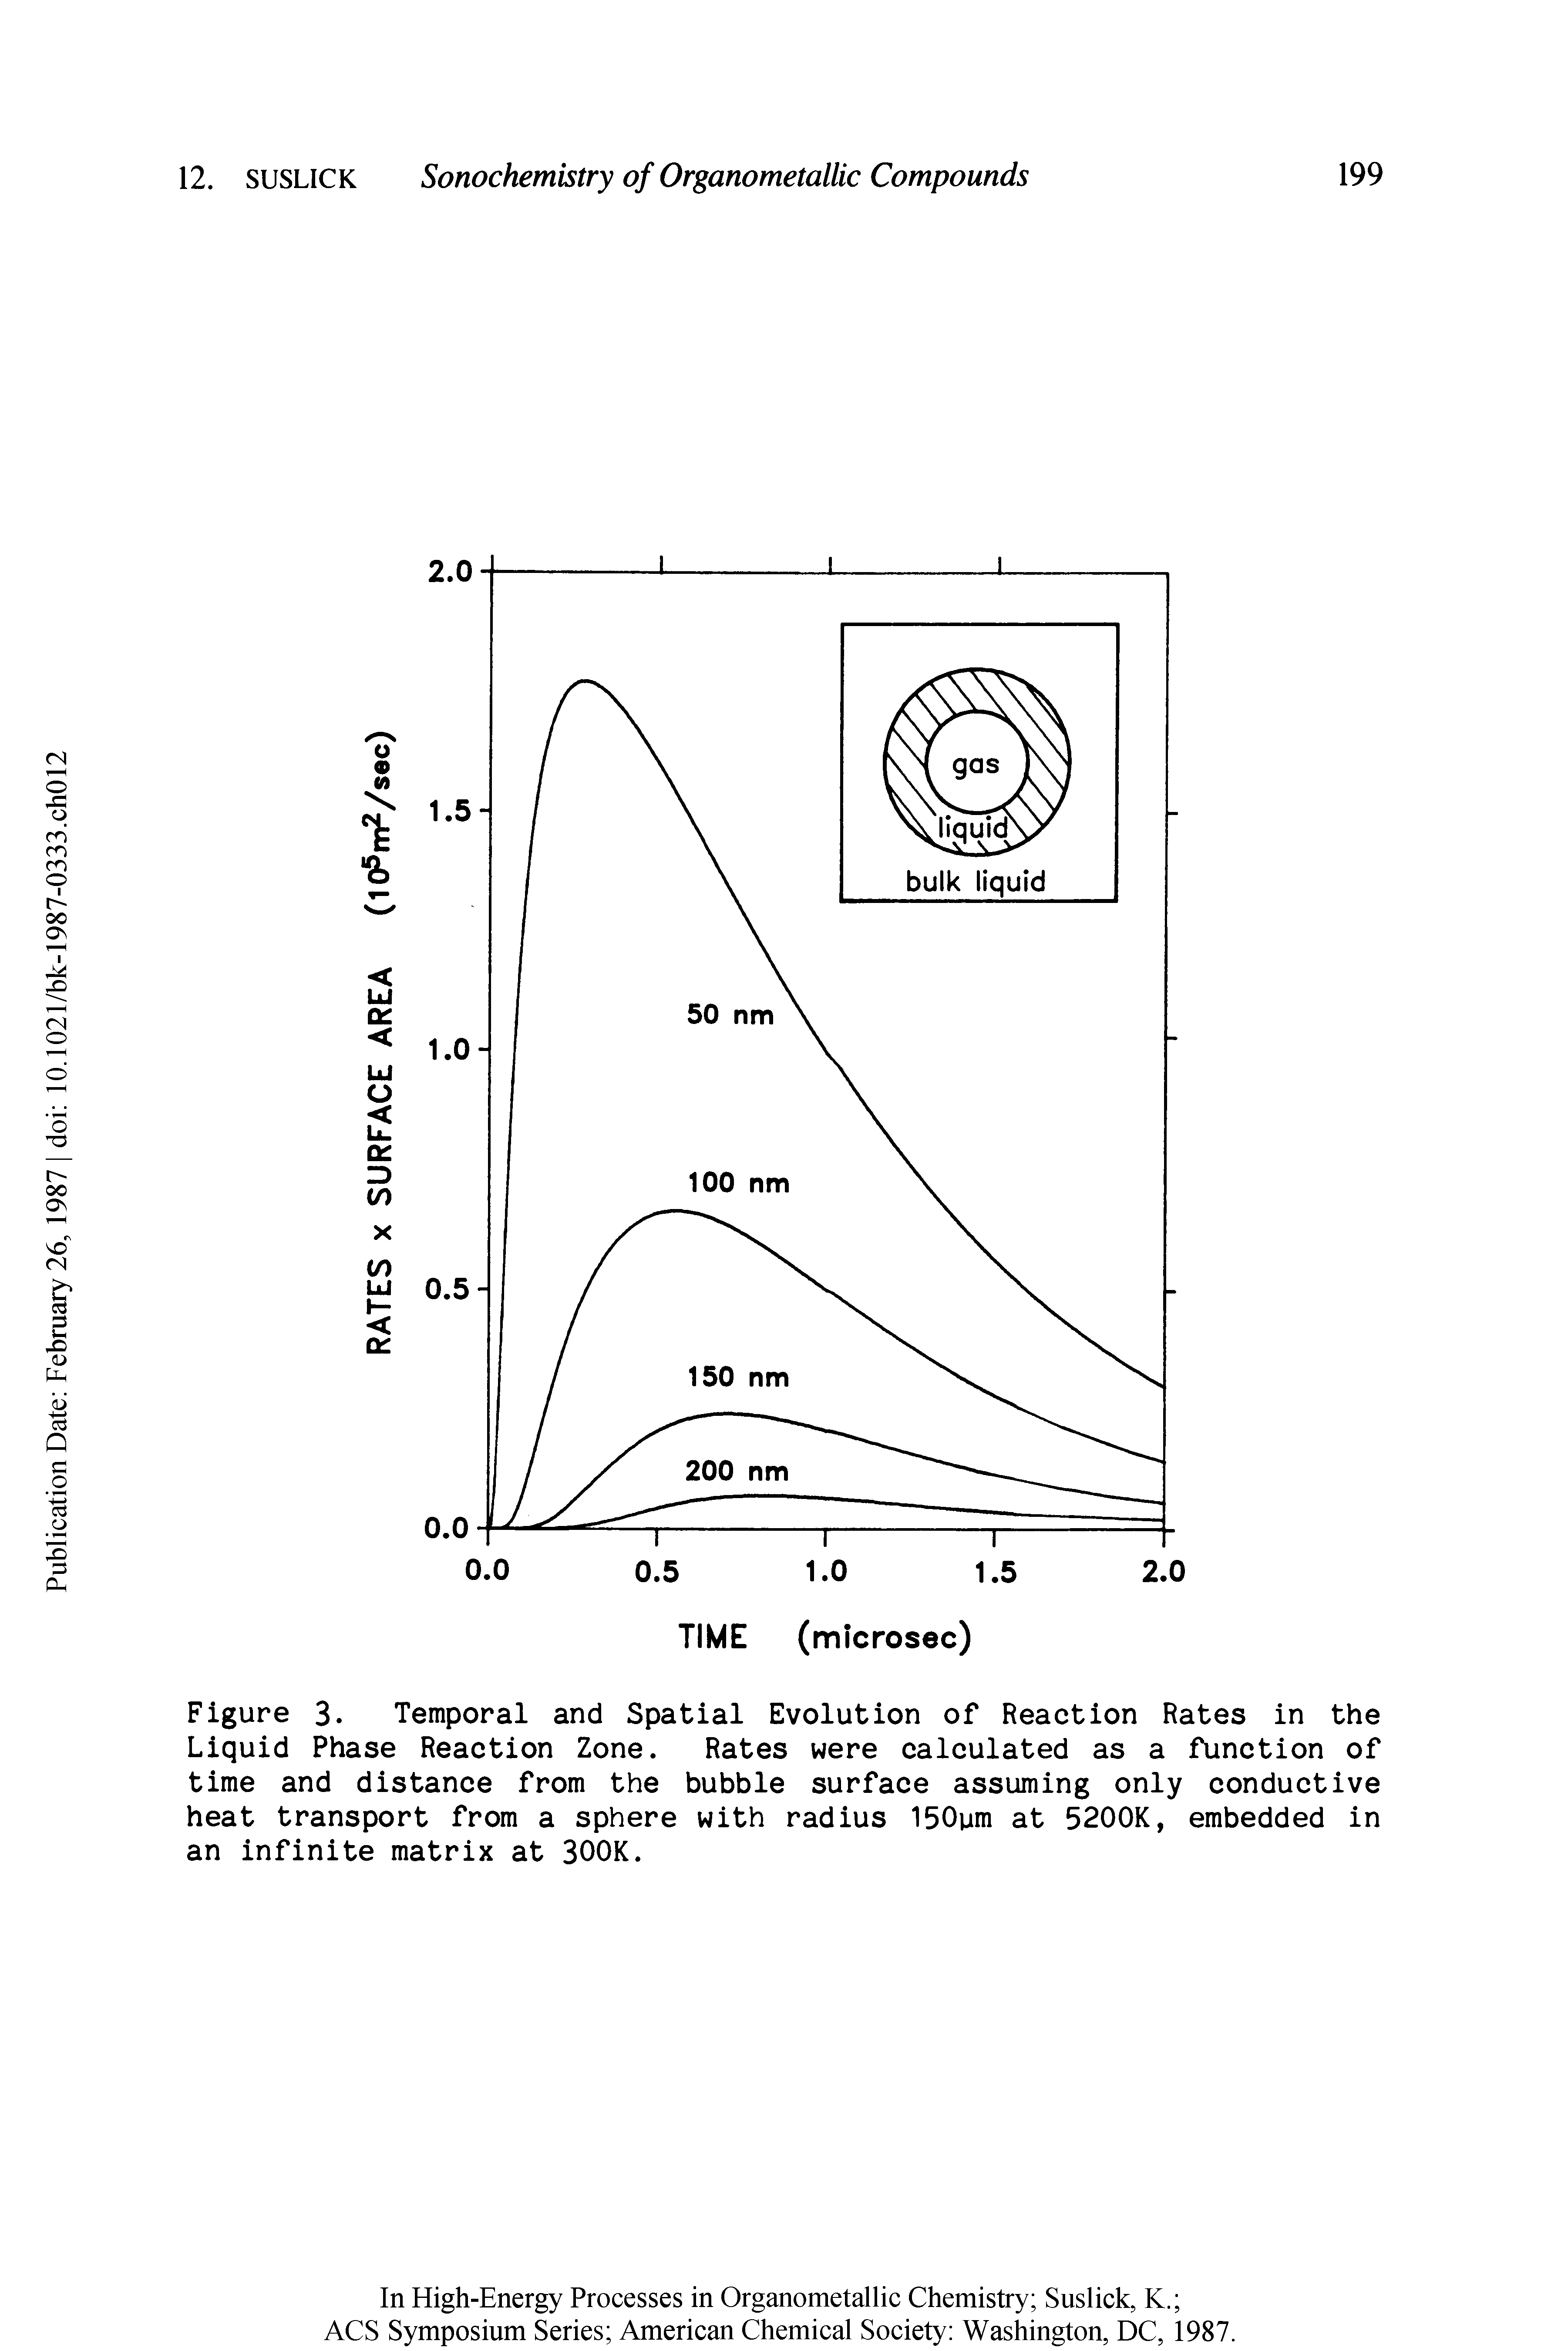 Figure 3. Temporal and Spatial Evolution of Reaction Rates in the Liquid Phase Reaction Zone. Rates were calculated as a function of time and distance from the bubble surface assuming only conductive heat transport from a sphere with radius 150ym at 5200K, embedded in an infinite matrix at 300K.